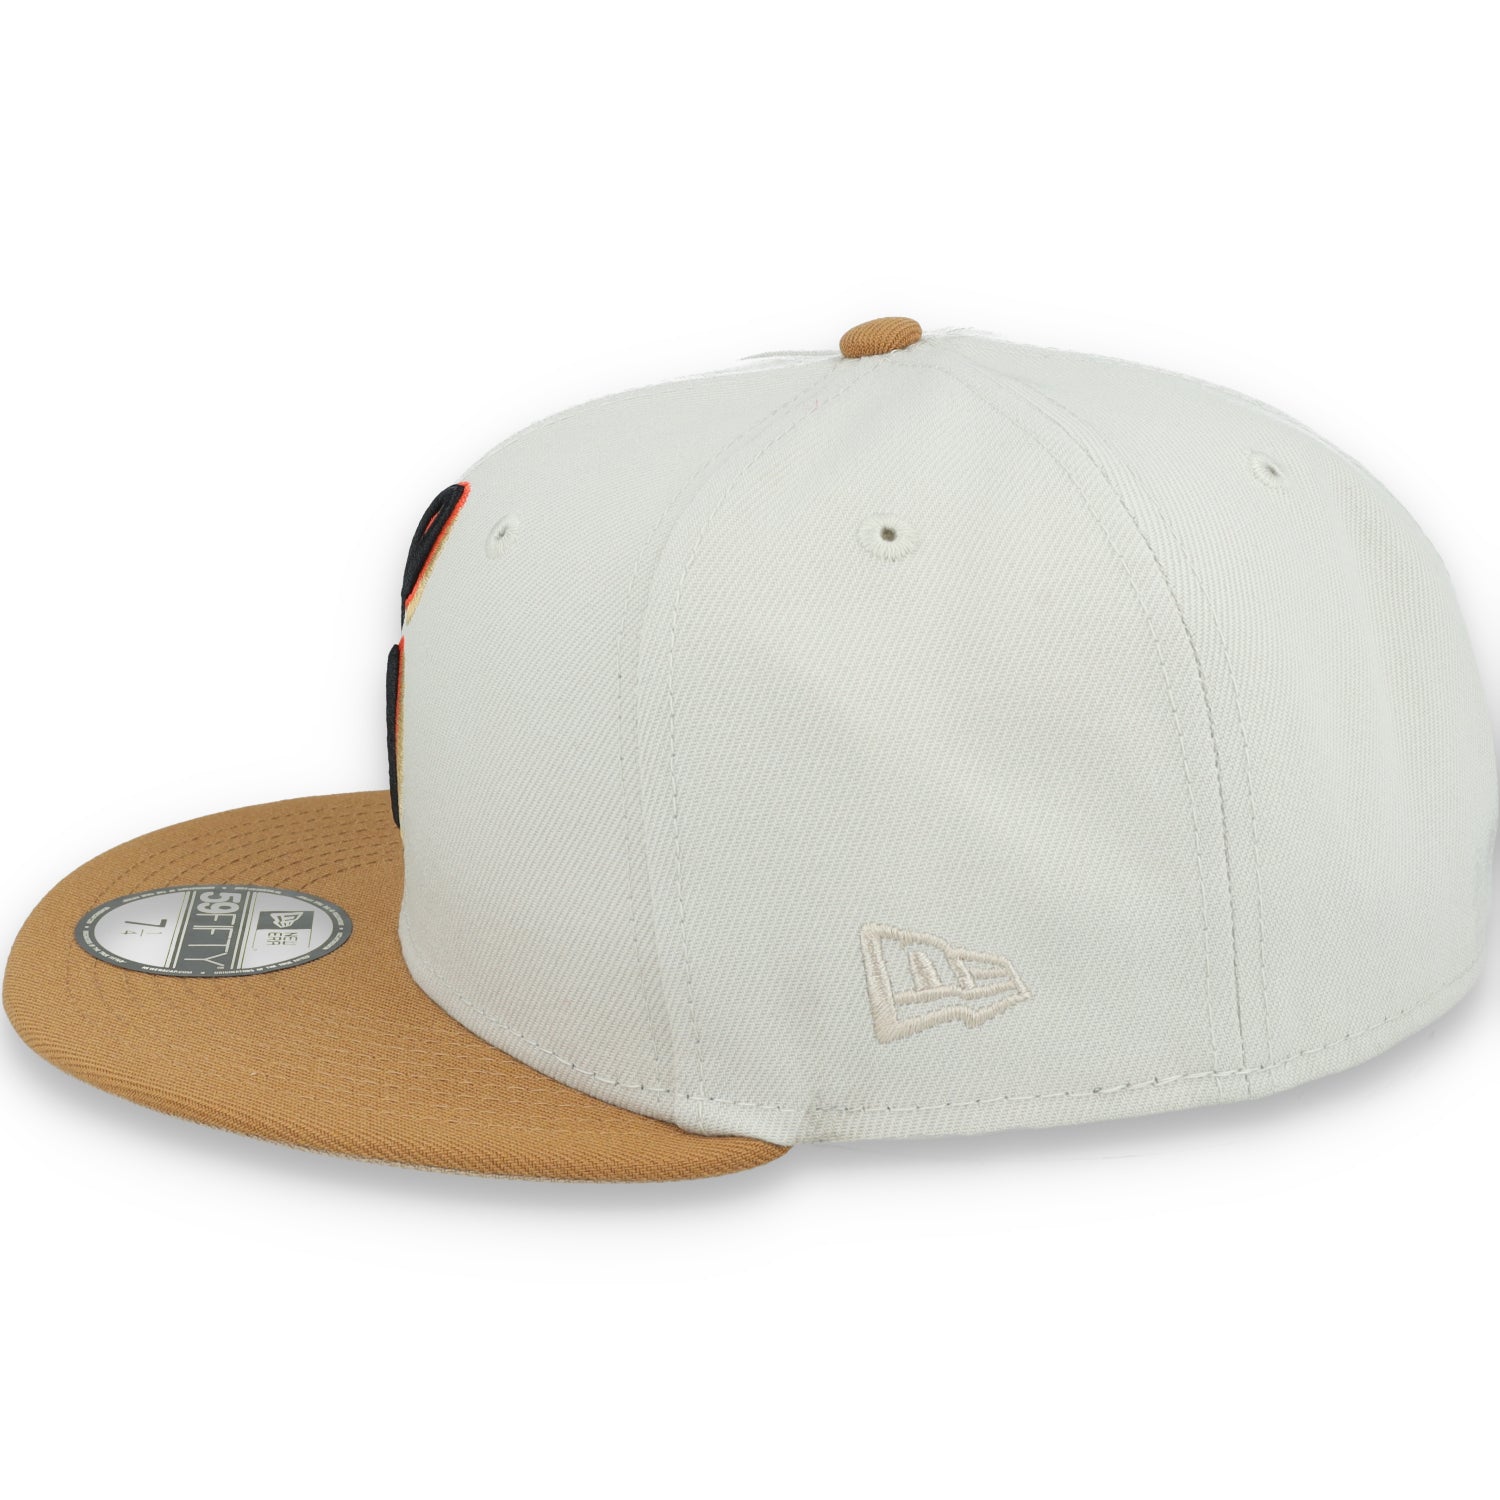 New Era San Francisco Giants 50th Anniversary Side Patch 59IFTY Fitted hat- Chrome/Light Bronze